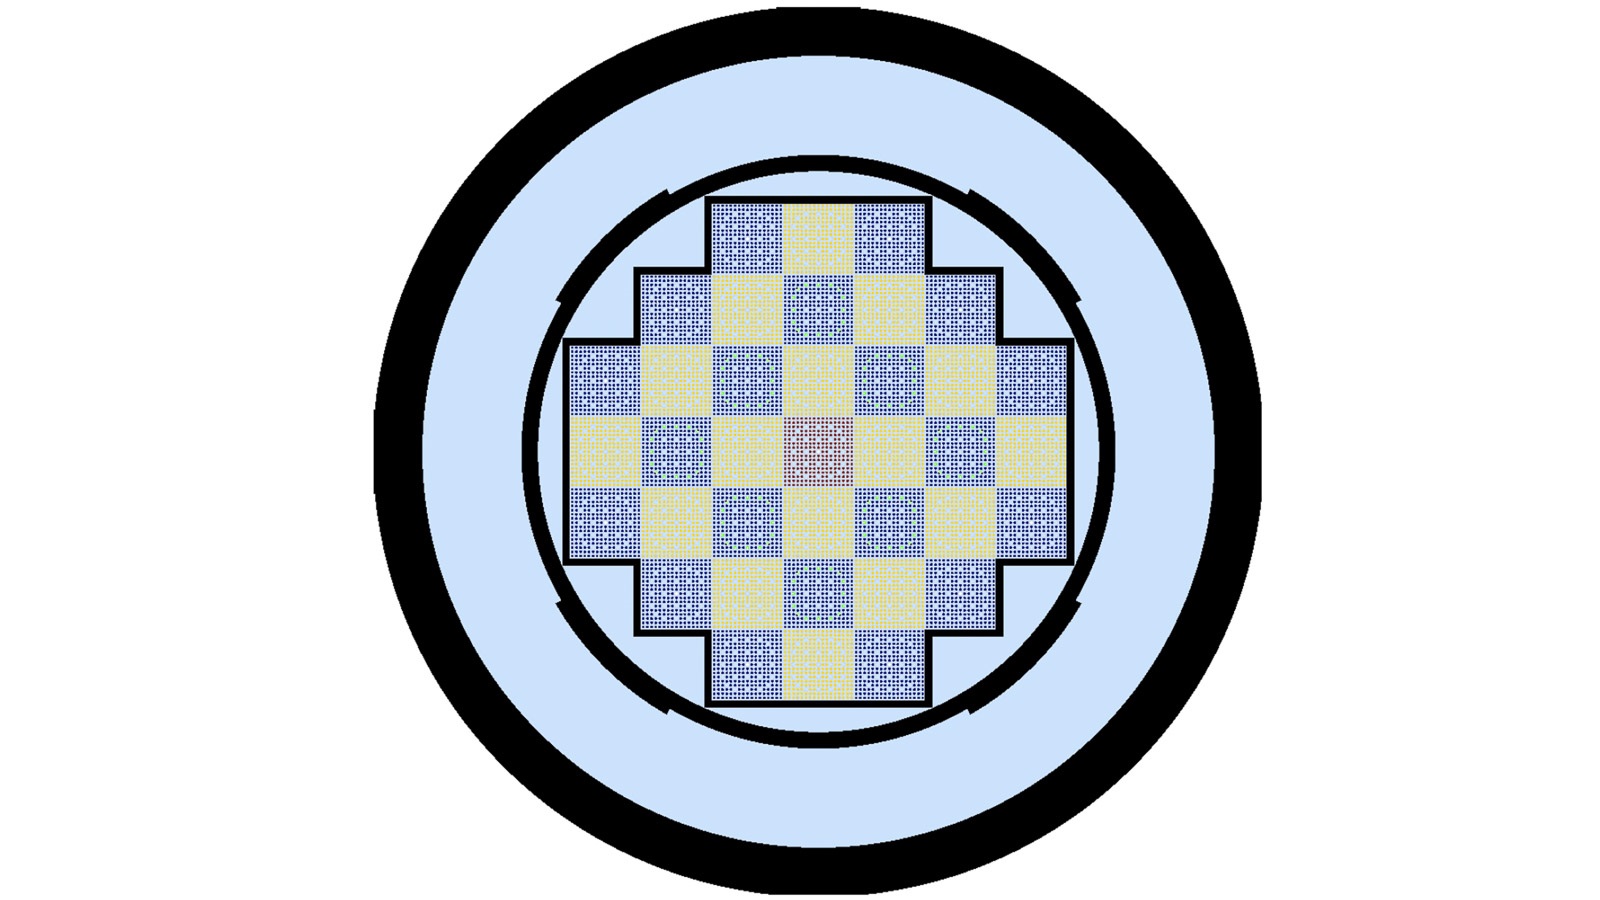 A blue circle with checkerboard-like segmentation representing the individual pins in a nuclear reactor core.